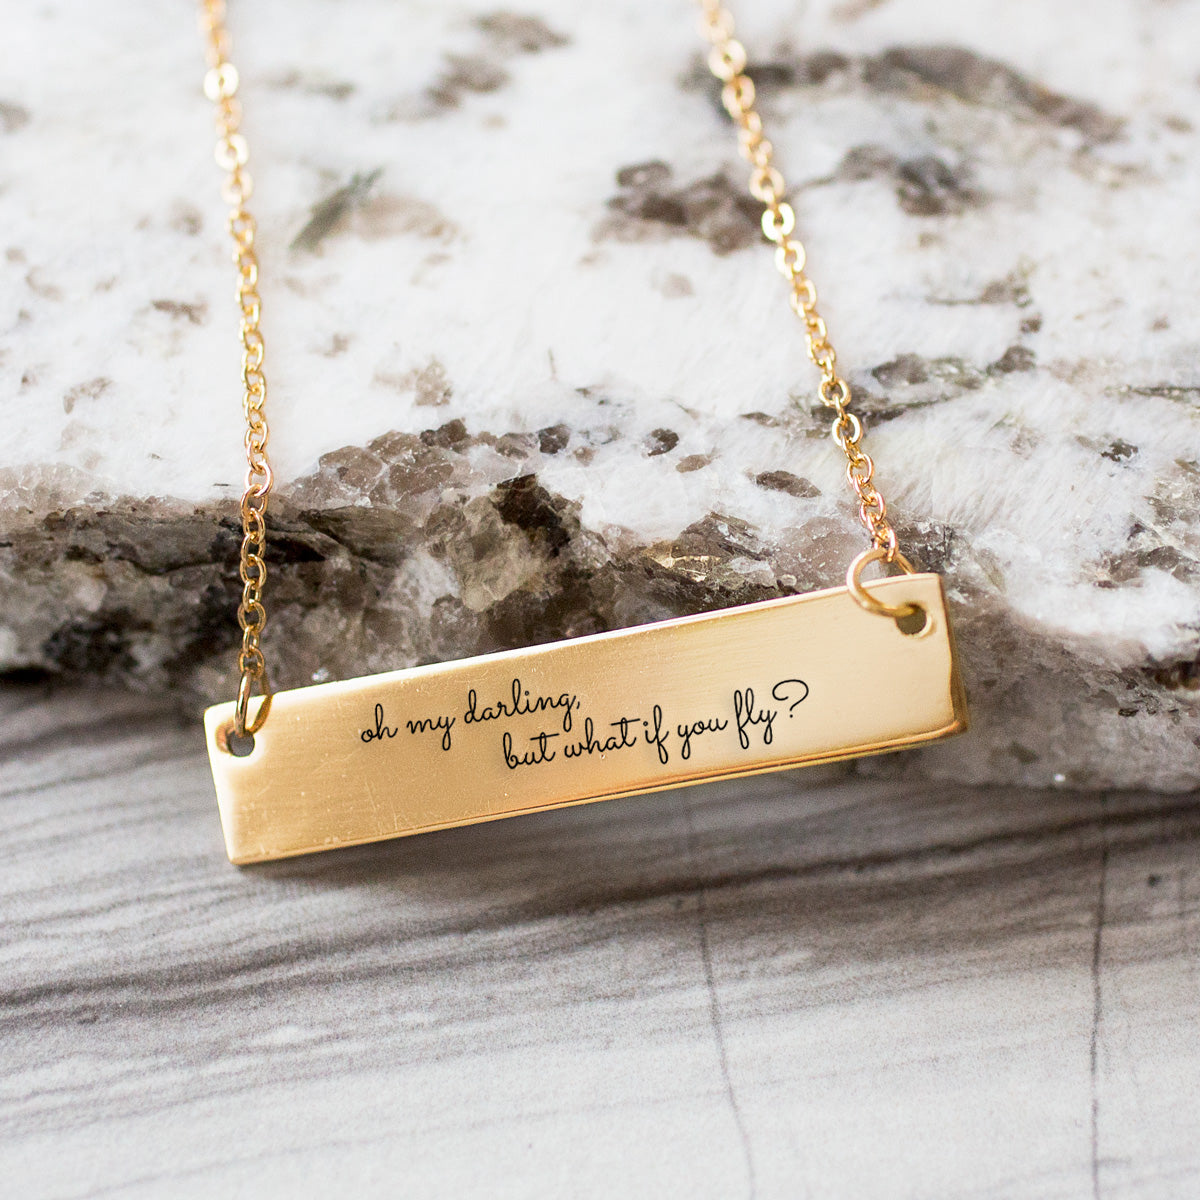 Gold Oh my darling, but what if you fly? Bar Necklace